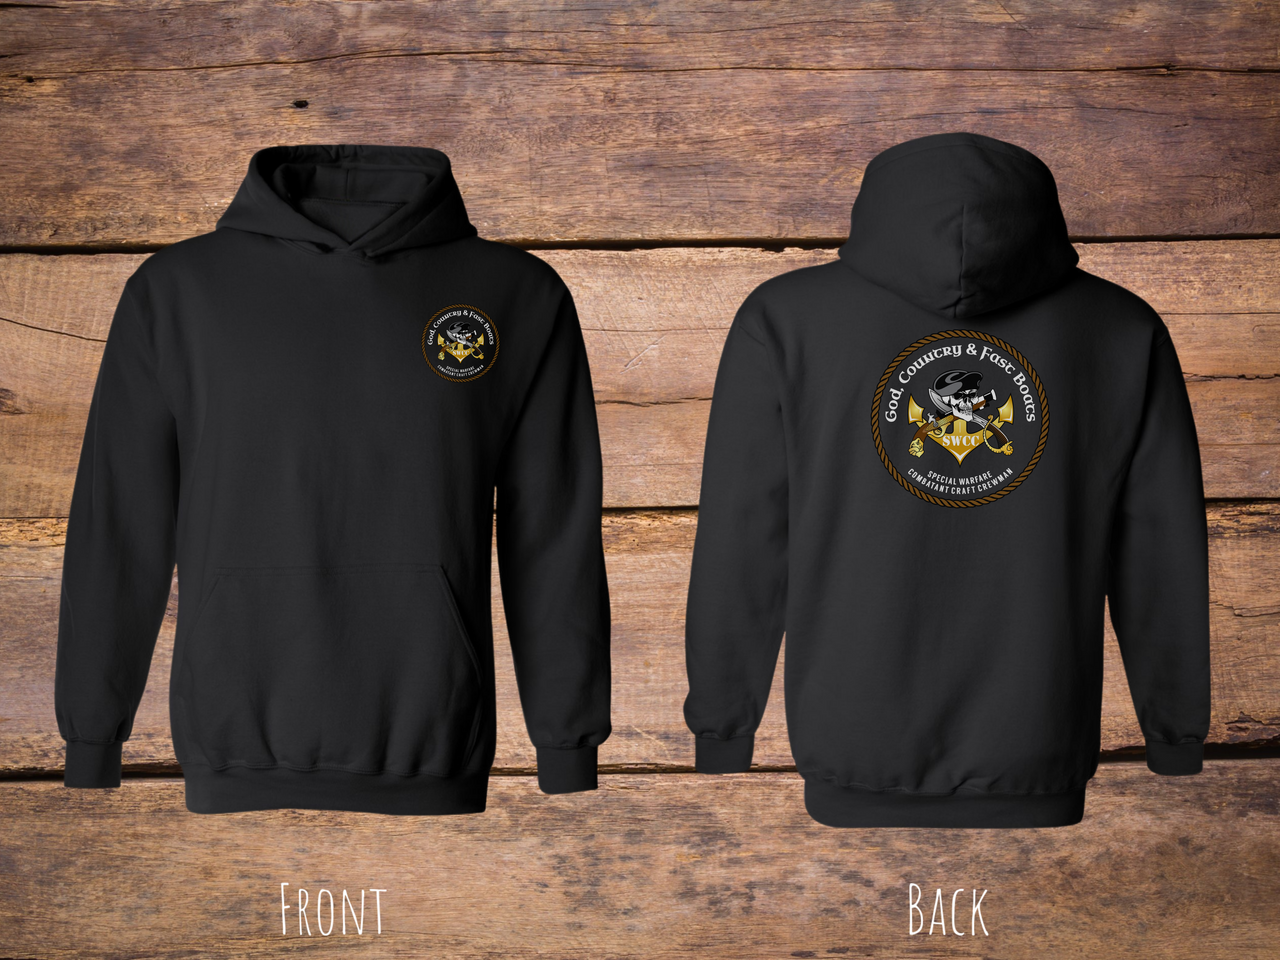 God Country & Fast Boats Hoodie (Color)